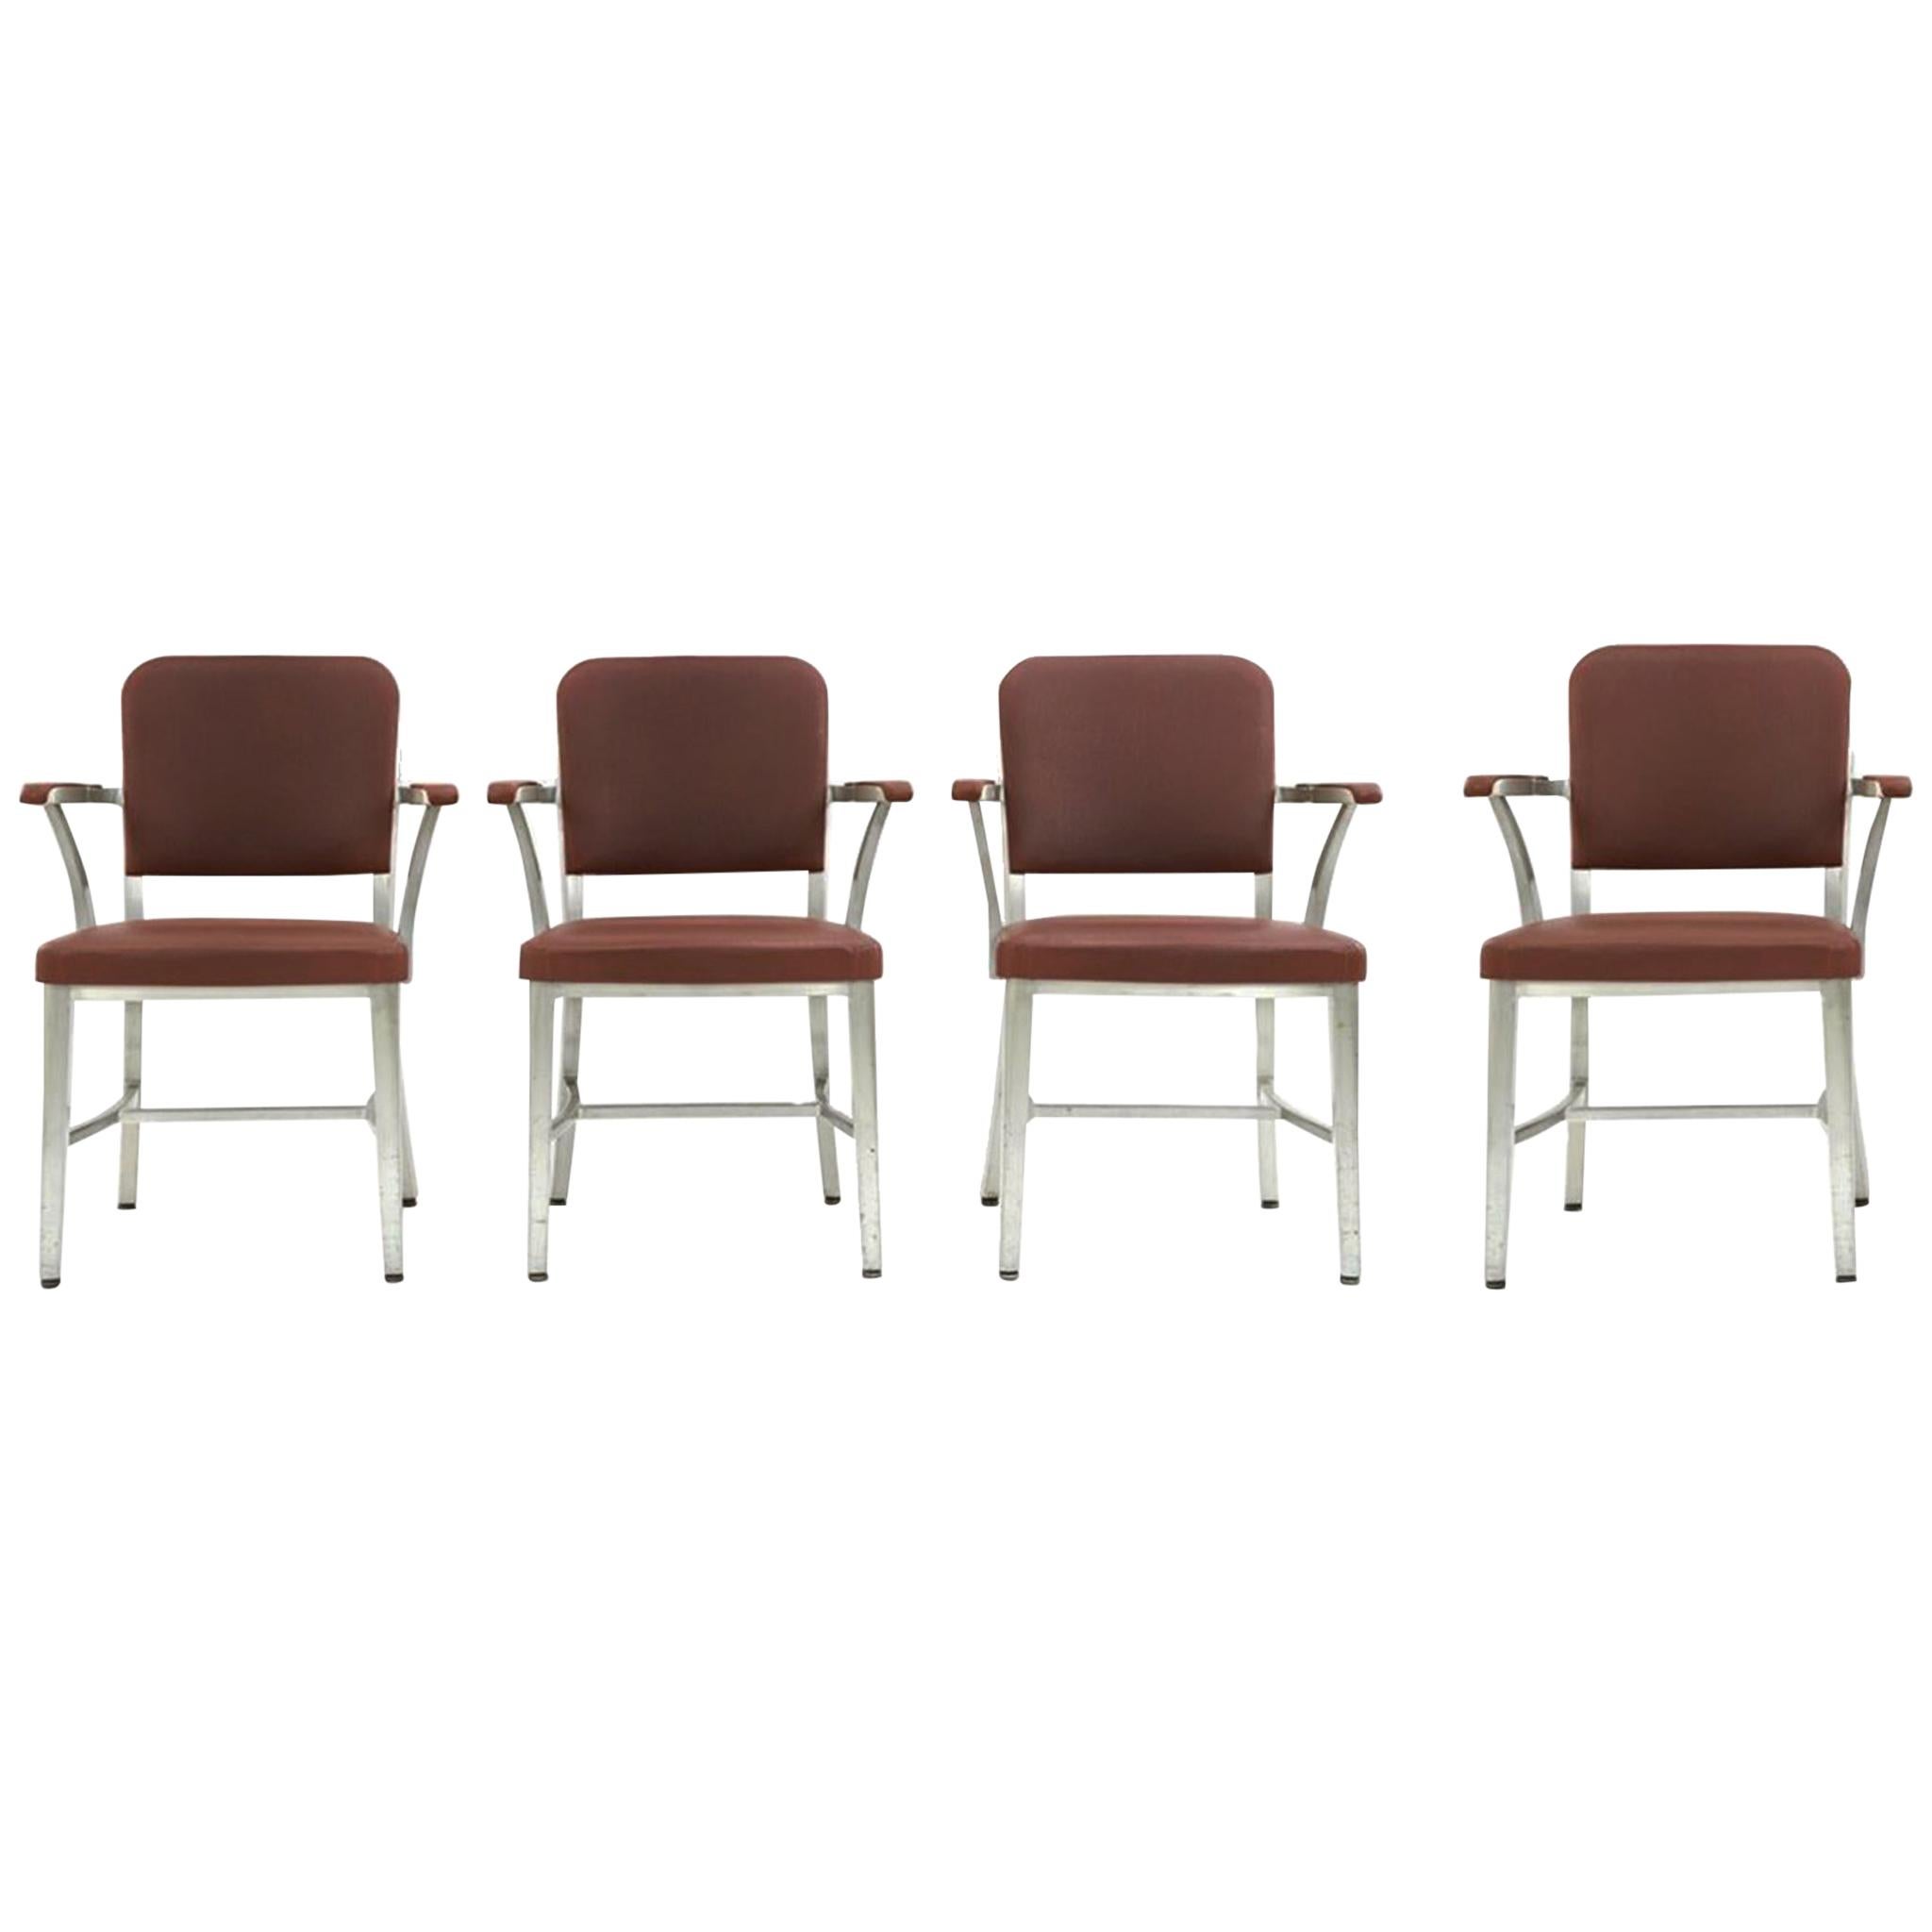 Set of 4 Midcentury Goodform Aluminum Armchairs by the General Fireproofing Co.